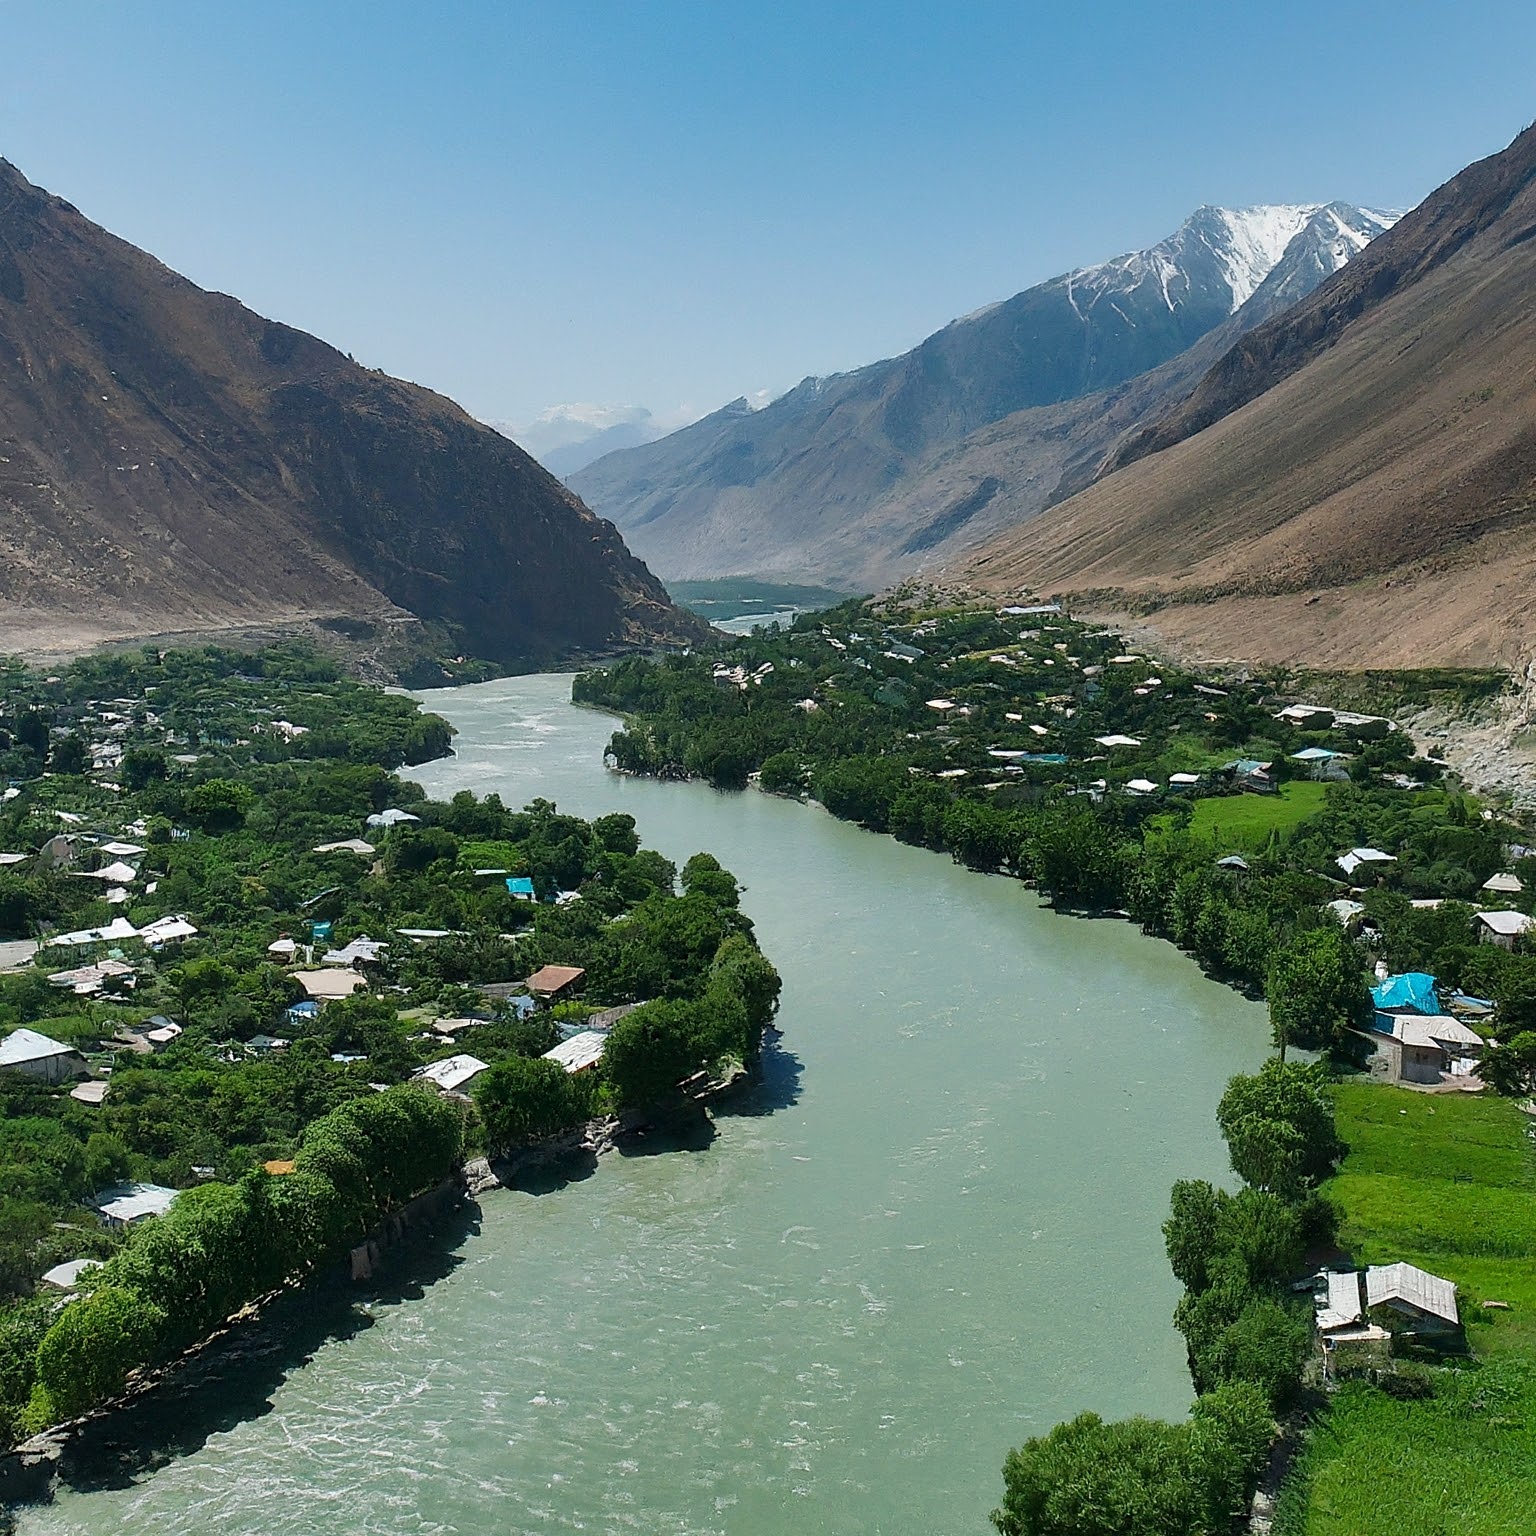 The Panj River flowing through Kalaikhum, Tajikistan, with mountains in the distance.